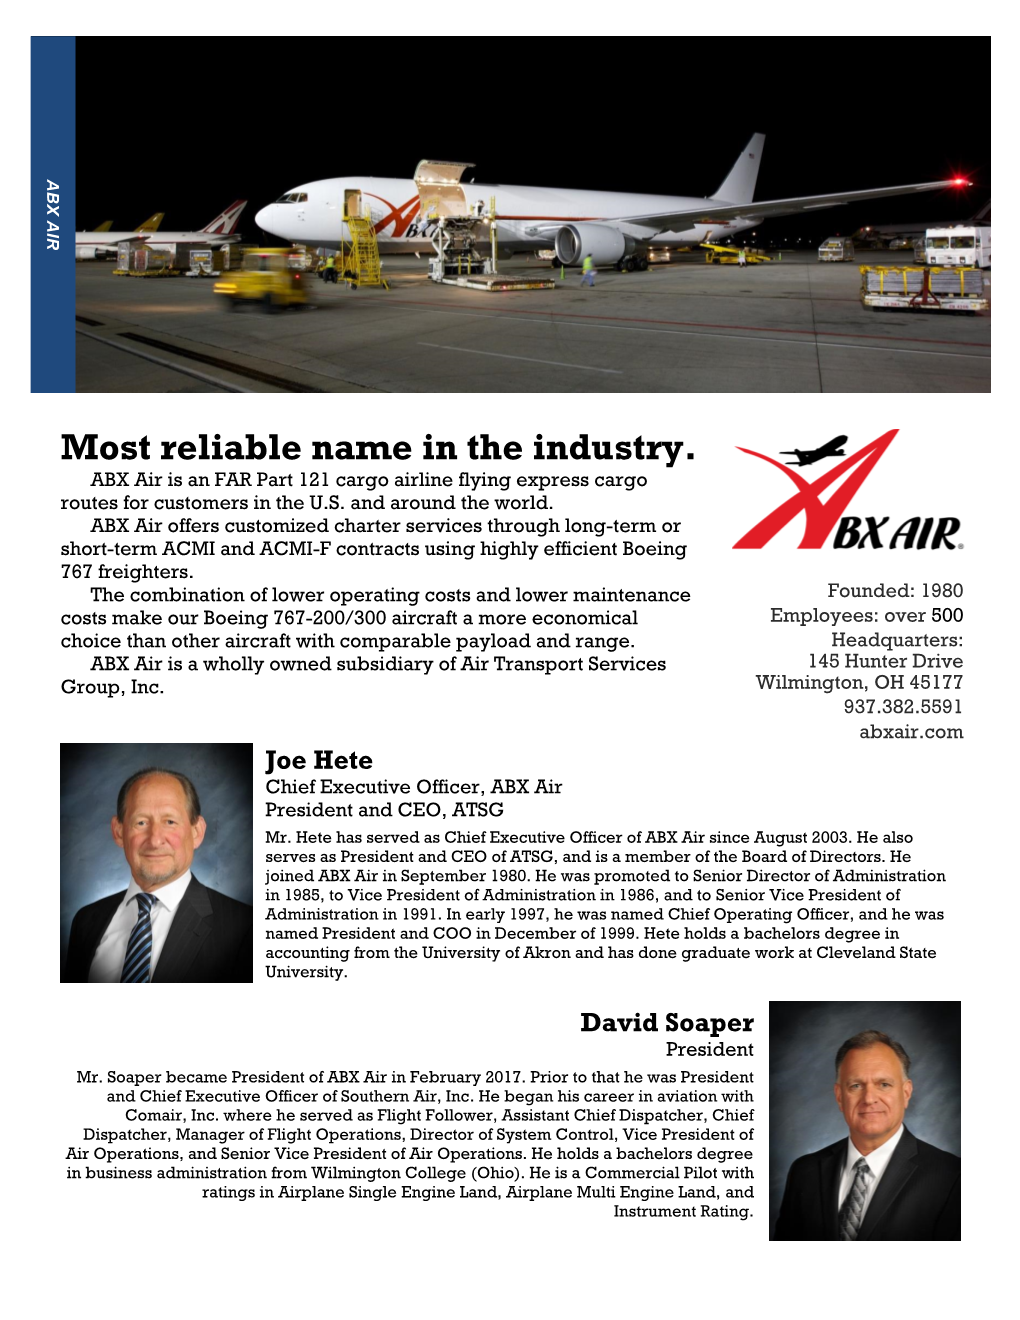 Most Reliable Name in the Industry. ABX Air Is an FAR Part 121 Cargo Airline Flying Express Cargo Routes for Customers in the U.S